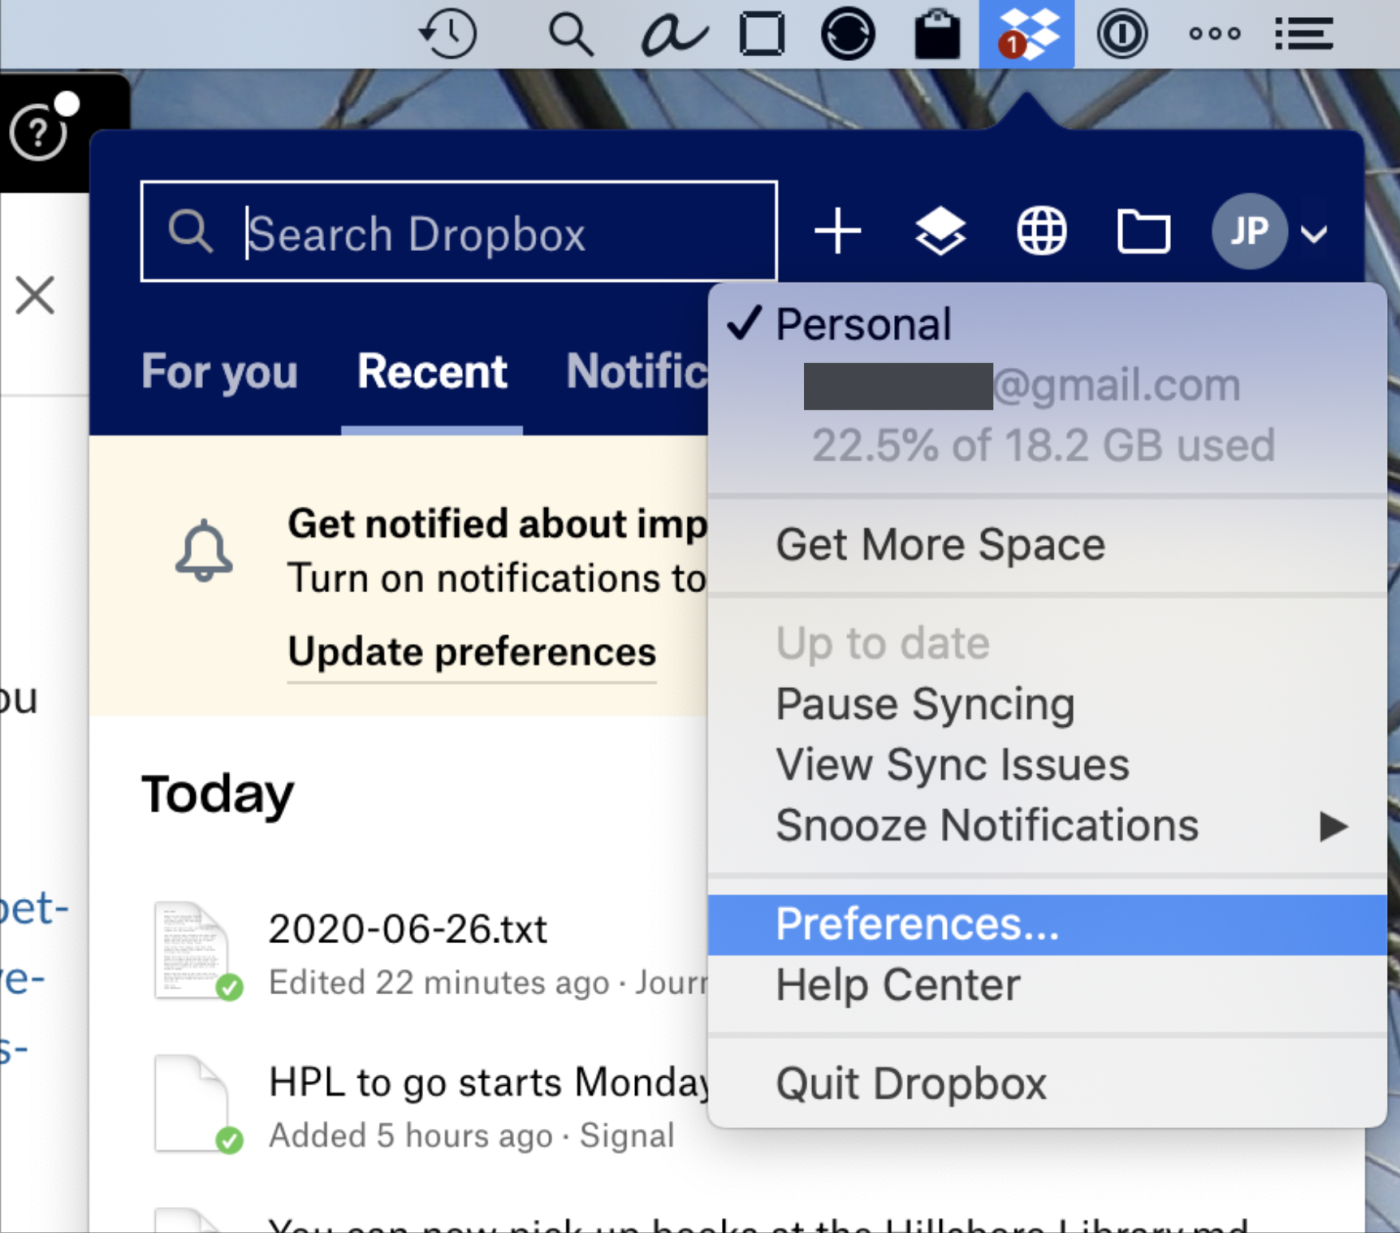 Finding the Dropbox preferences